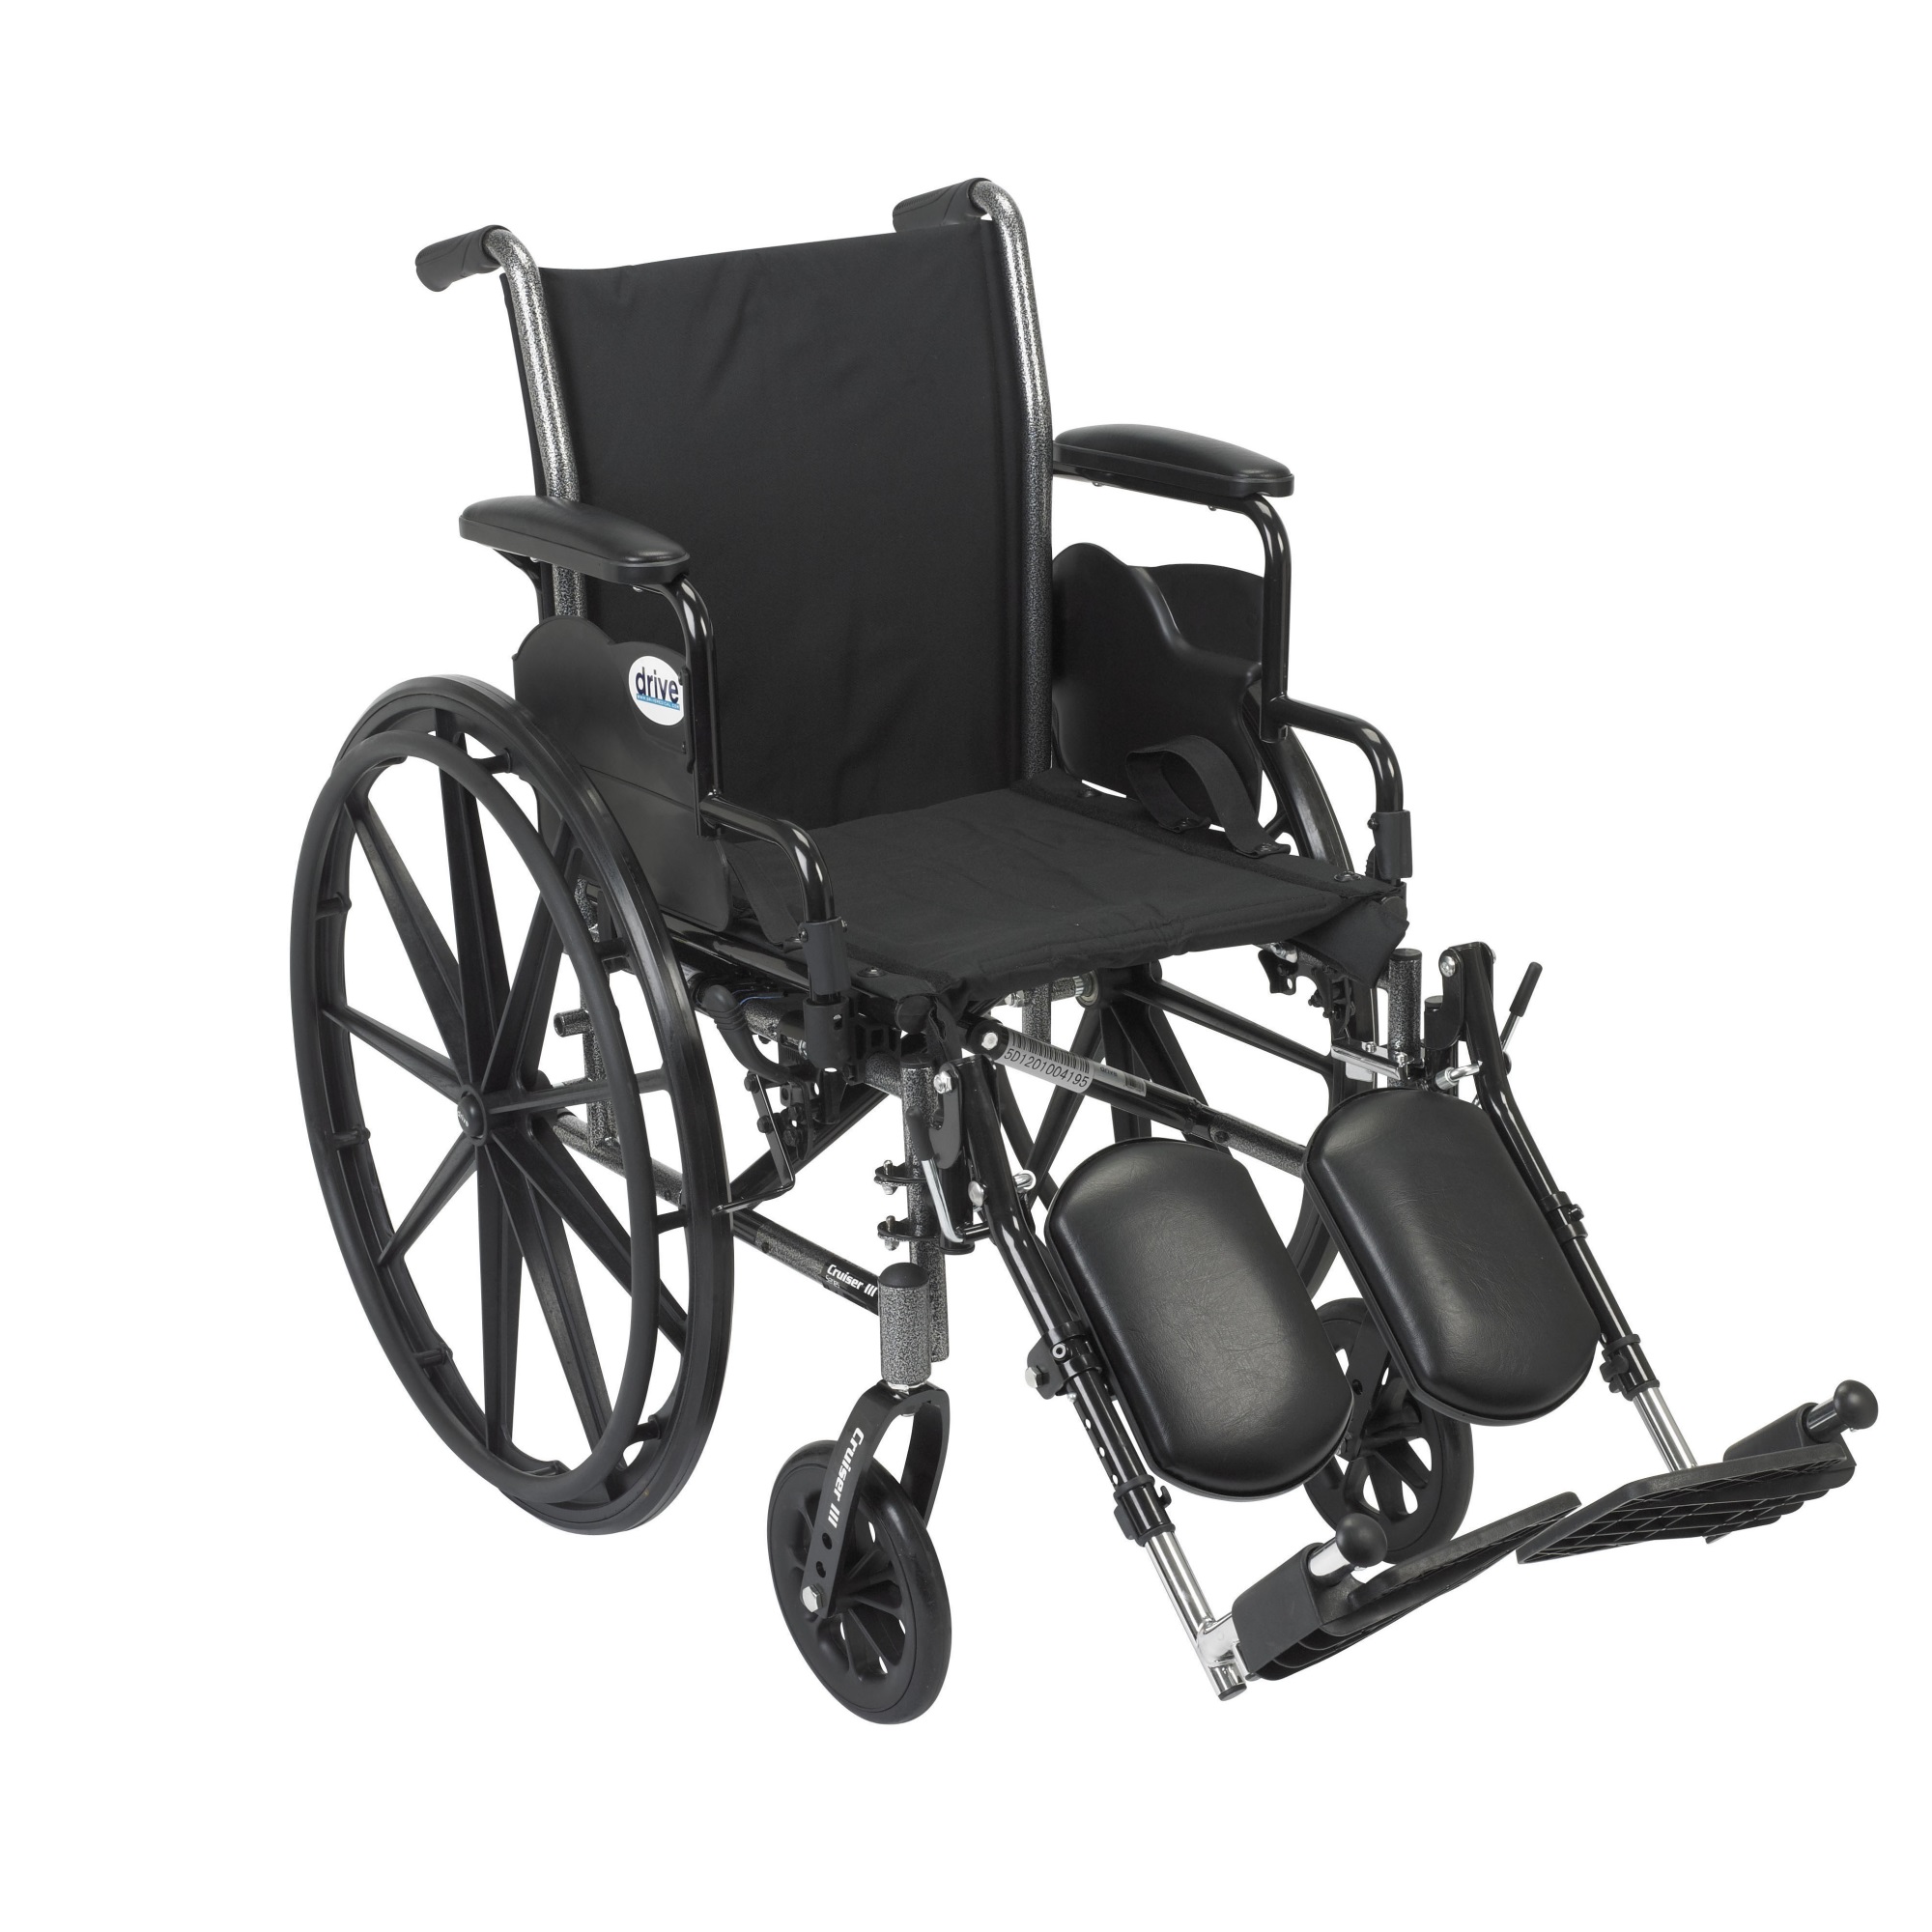 Drive DeVilbiss Healthcare Cruiser III Light Weight Wheelchair with Flip Back Removable Arms, Desk Arms, Elevating Leg Rests, 18" Seat